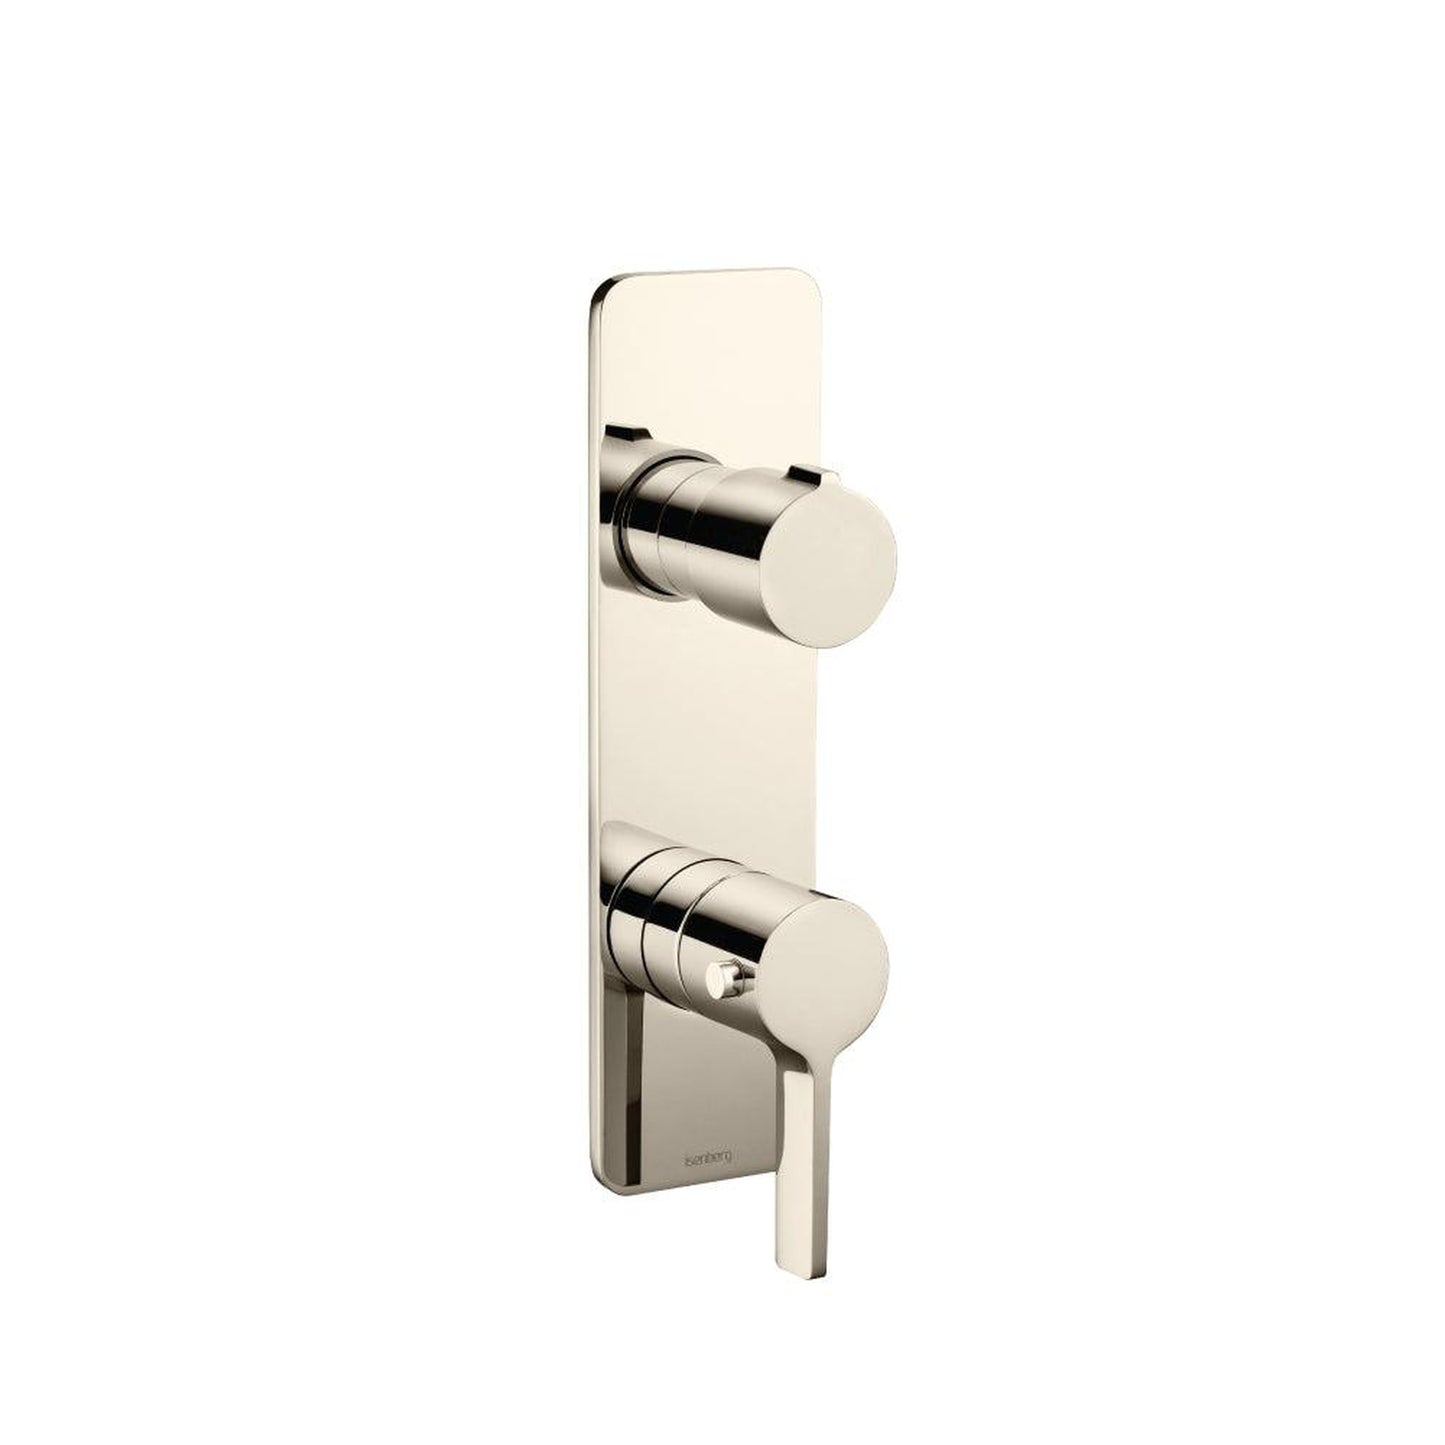 Isenberg Serie 260 3/4" Three Output Thermostatic Shower Valve and Trim in Polished Nickel